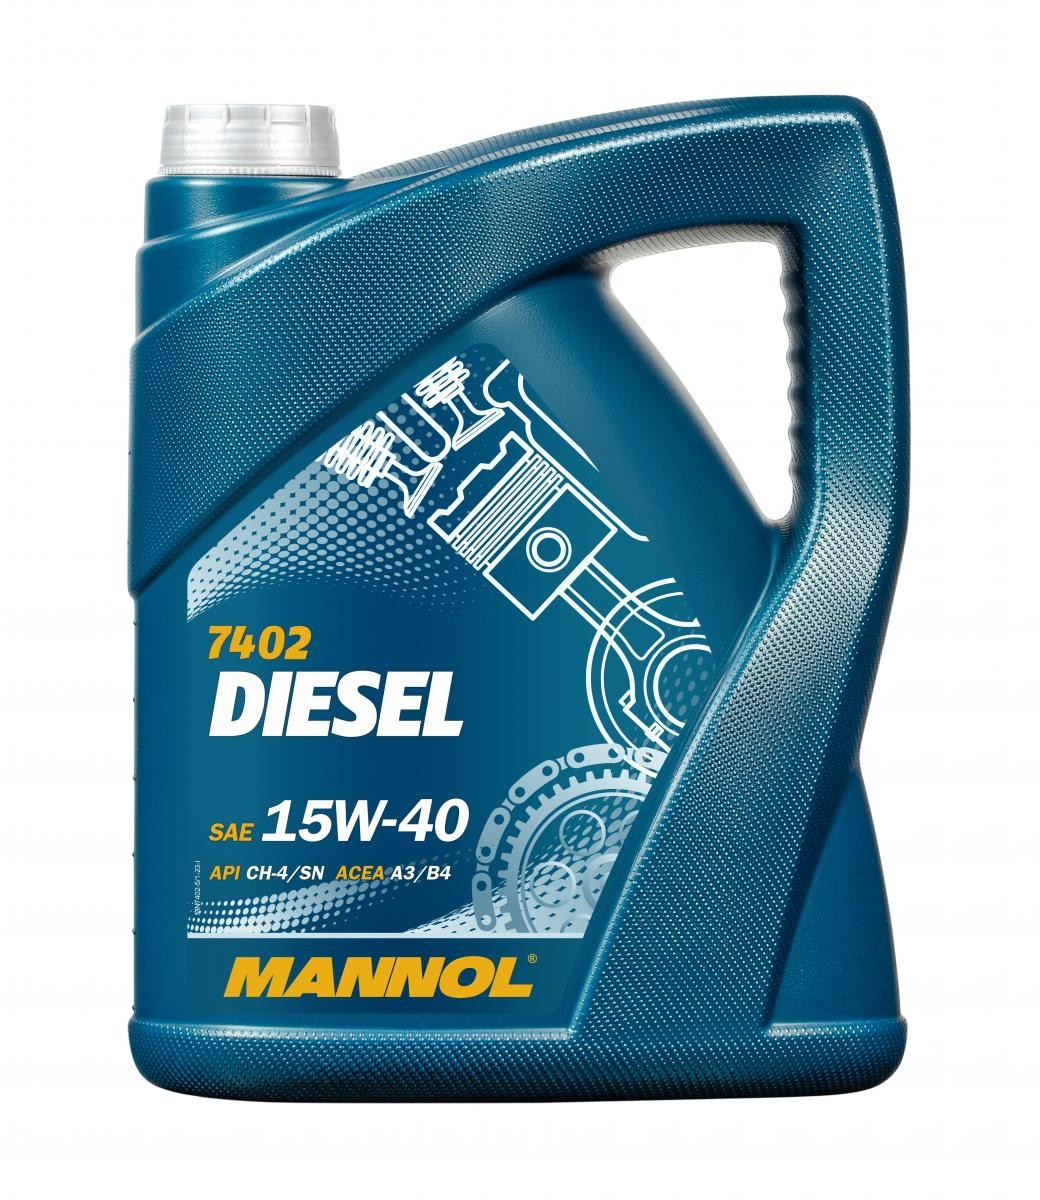 MANNOL MN7402-5 Engine oil IVECO experience and price